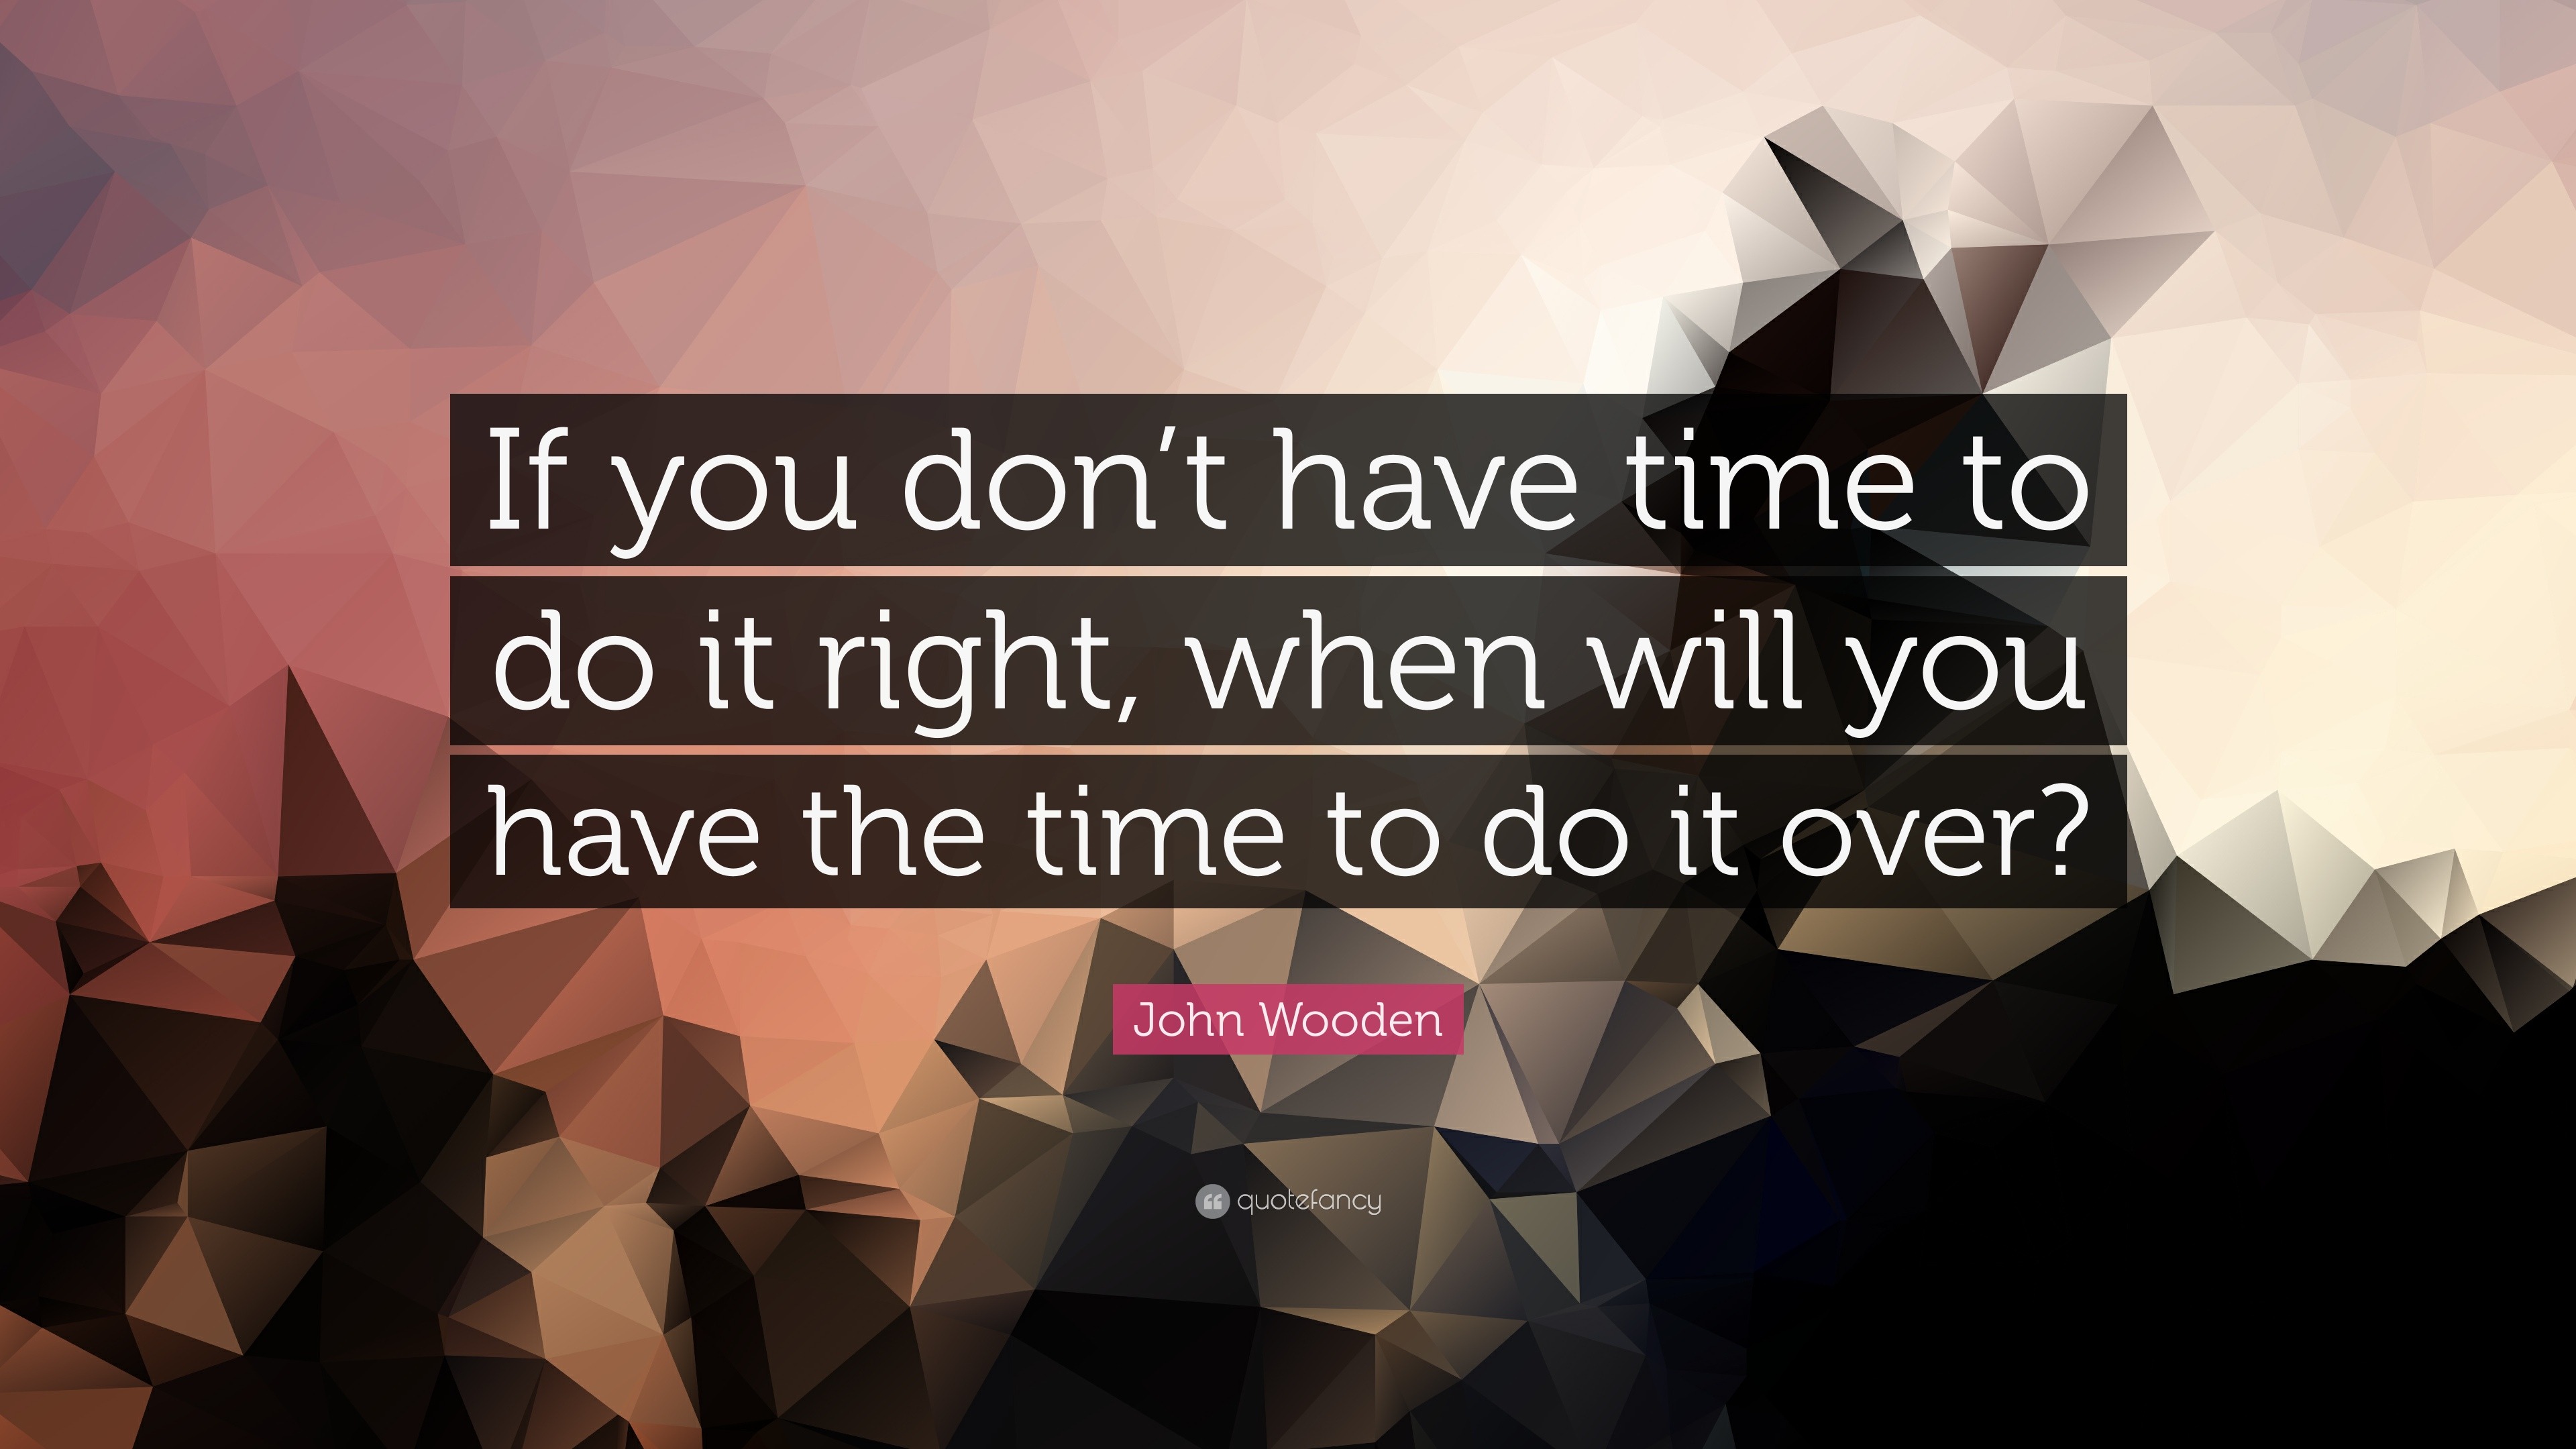 John Wooden Quote: "If you don't have time to do it right, when will you have the time to do it ...